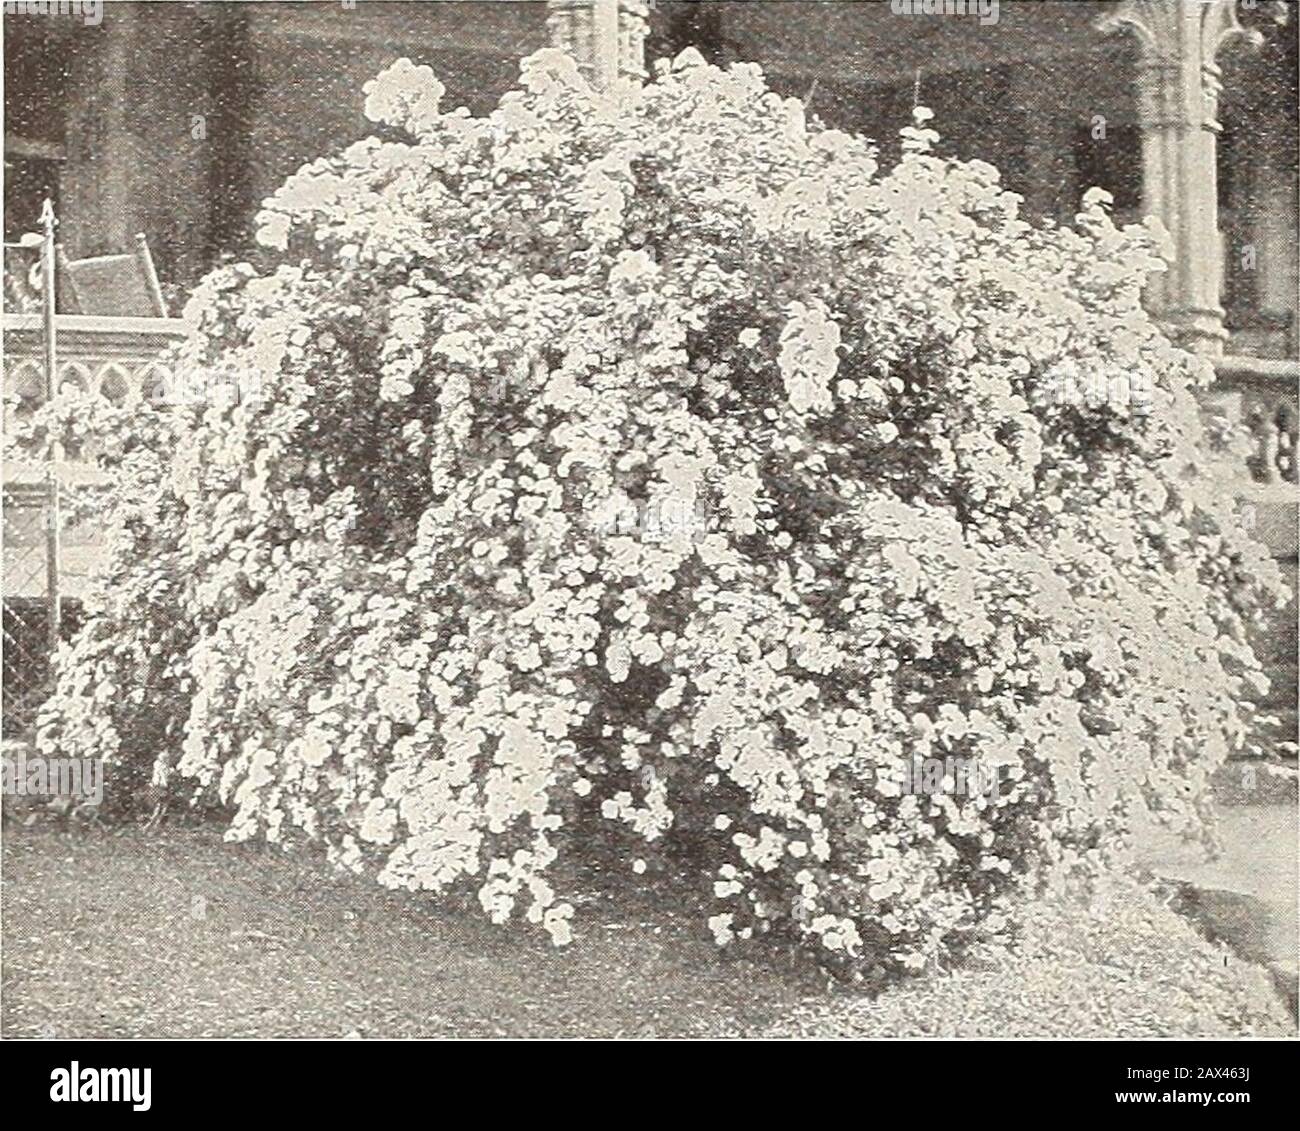 Currie's farm and garden annual : spring 1915 . LILAC.PER DOZ. !?5.00. 106 CURRIE BROTHERS COMPANY, MILWAUKEE, WIS.. SPIRAEA VAN HODTTBI. S. Van Houttei—This is beyond doubt the handsomestof all Spiraeas; in fact, it has few if any equalsamong ornamental shrubs. When in full bloom inMay and June it presents an appearance difficult todescribe, except that from a little distance it seemsto be wreathed with snow, the branches droopinggracefully under the fleecy covering. Even whennot in bloom the plant from its habit of growth andpretty foliage has a very pleasing and artistic effect,either as a Stock Photo